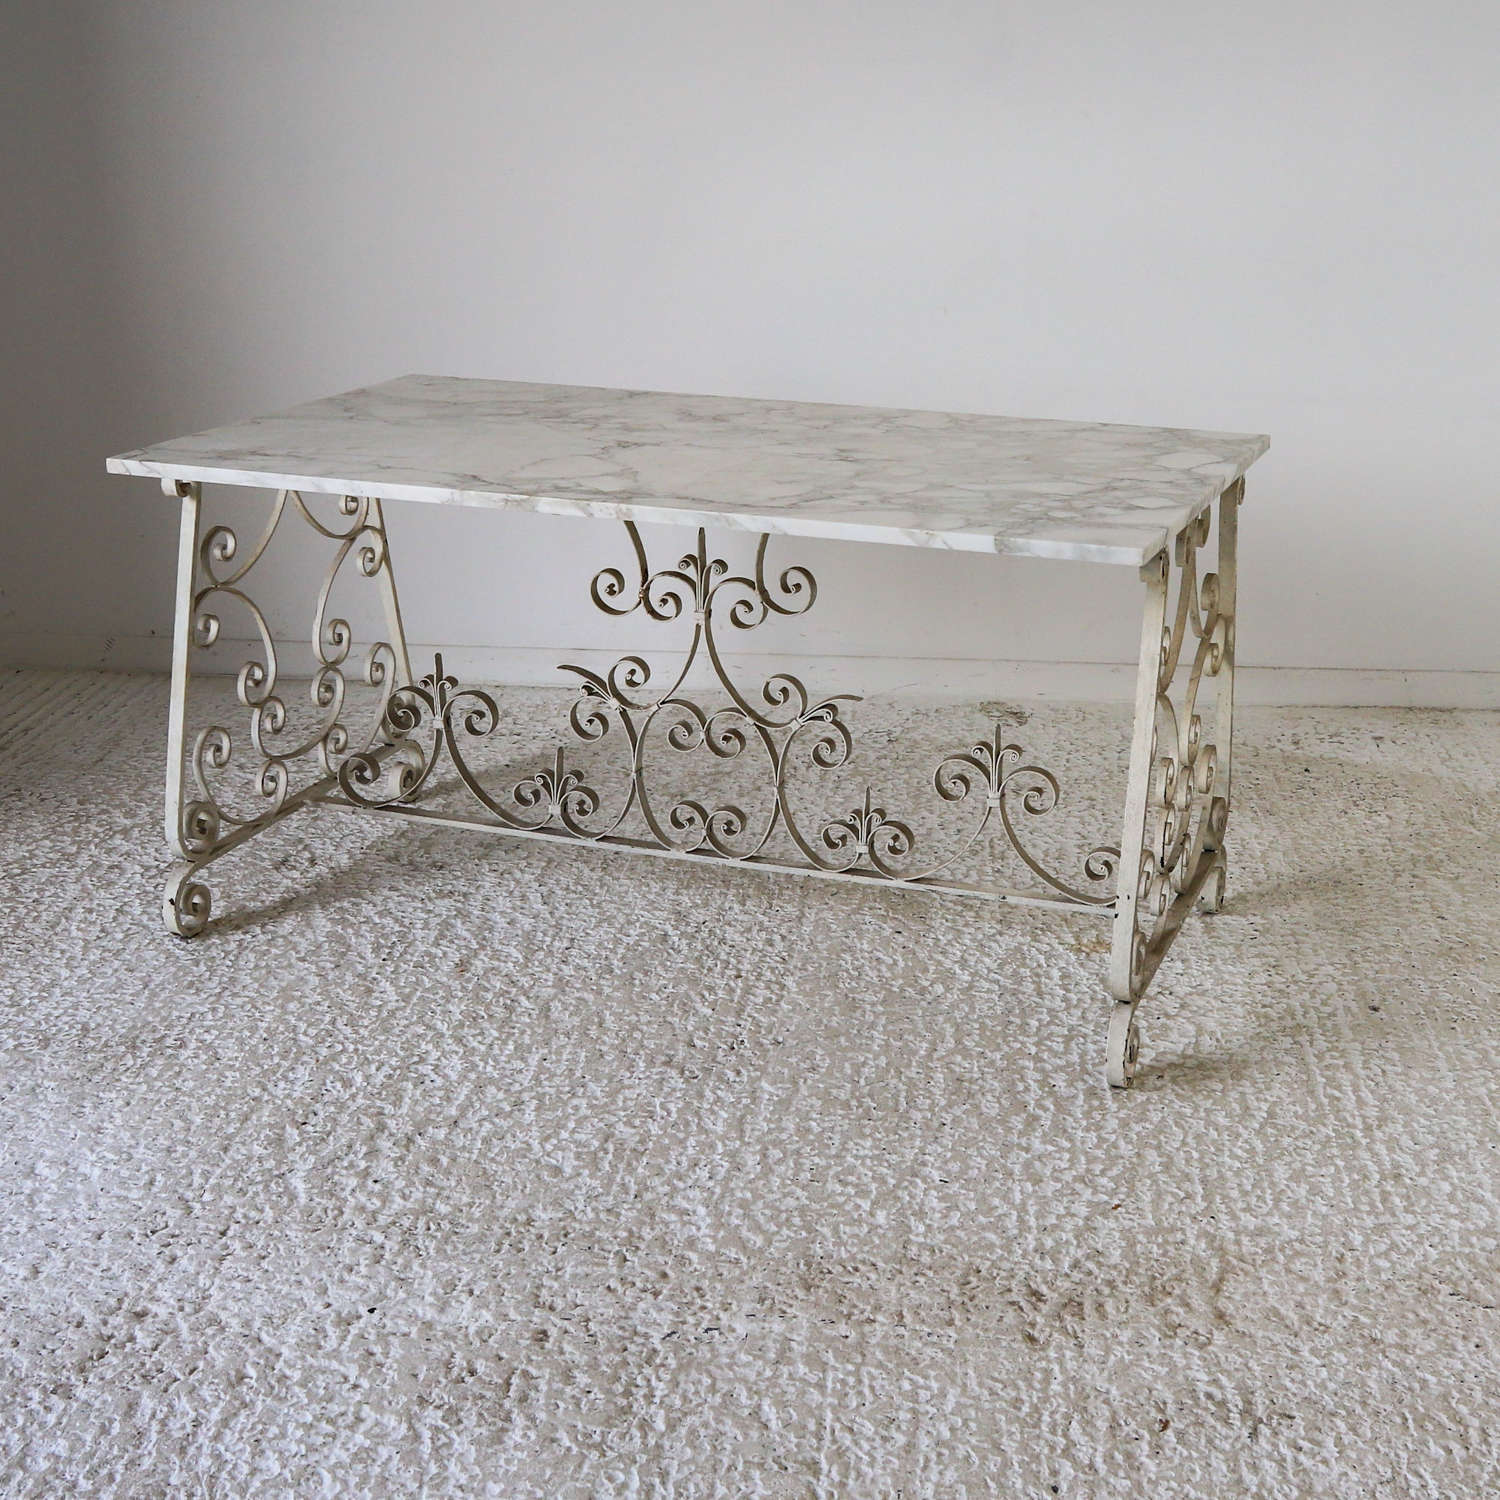 Decorative Iron Base Table With Later Marble Top